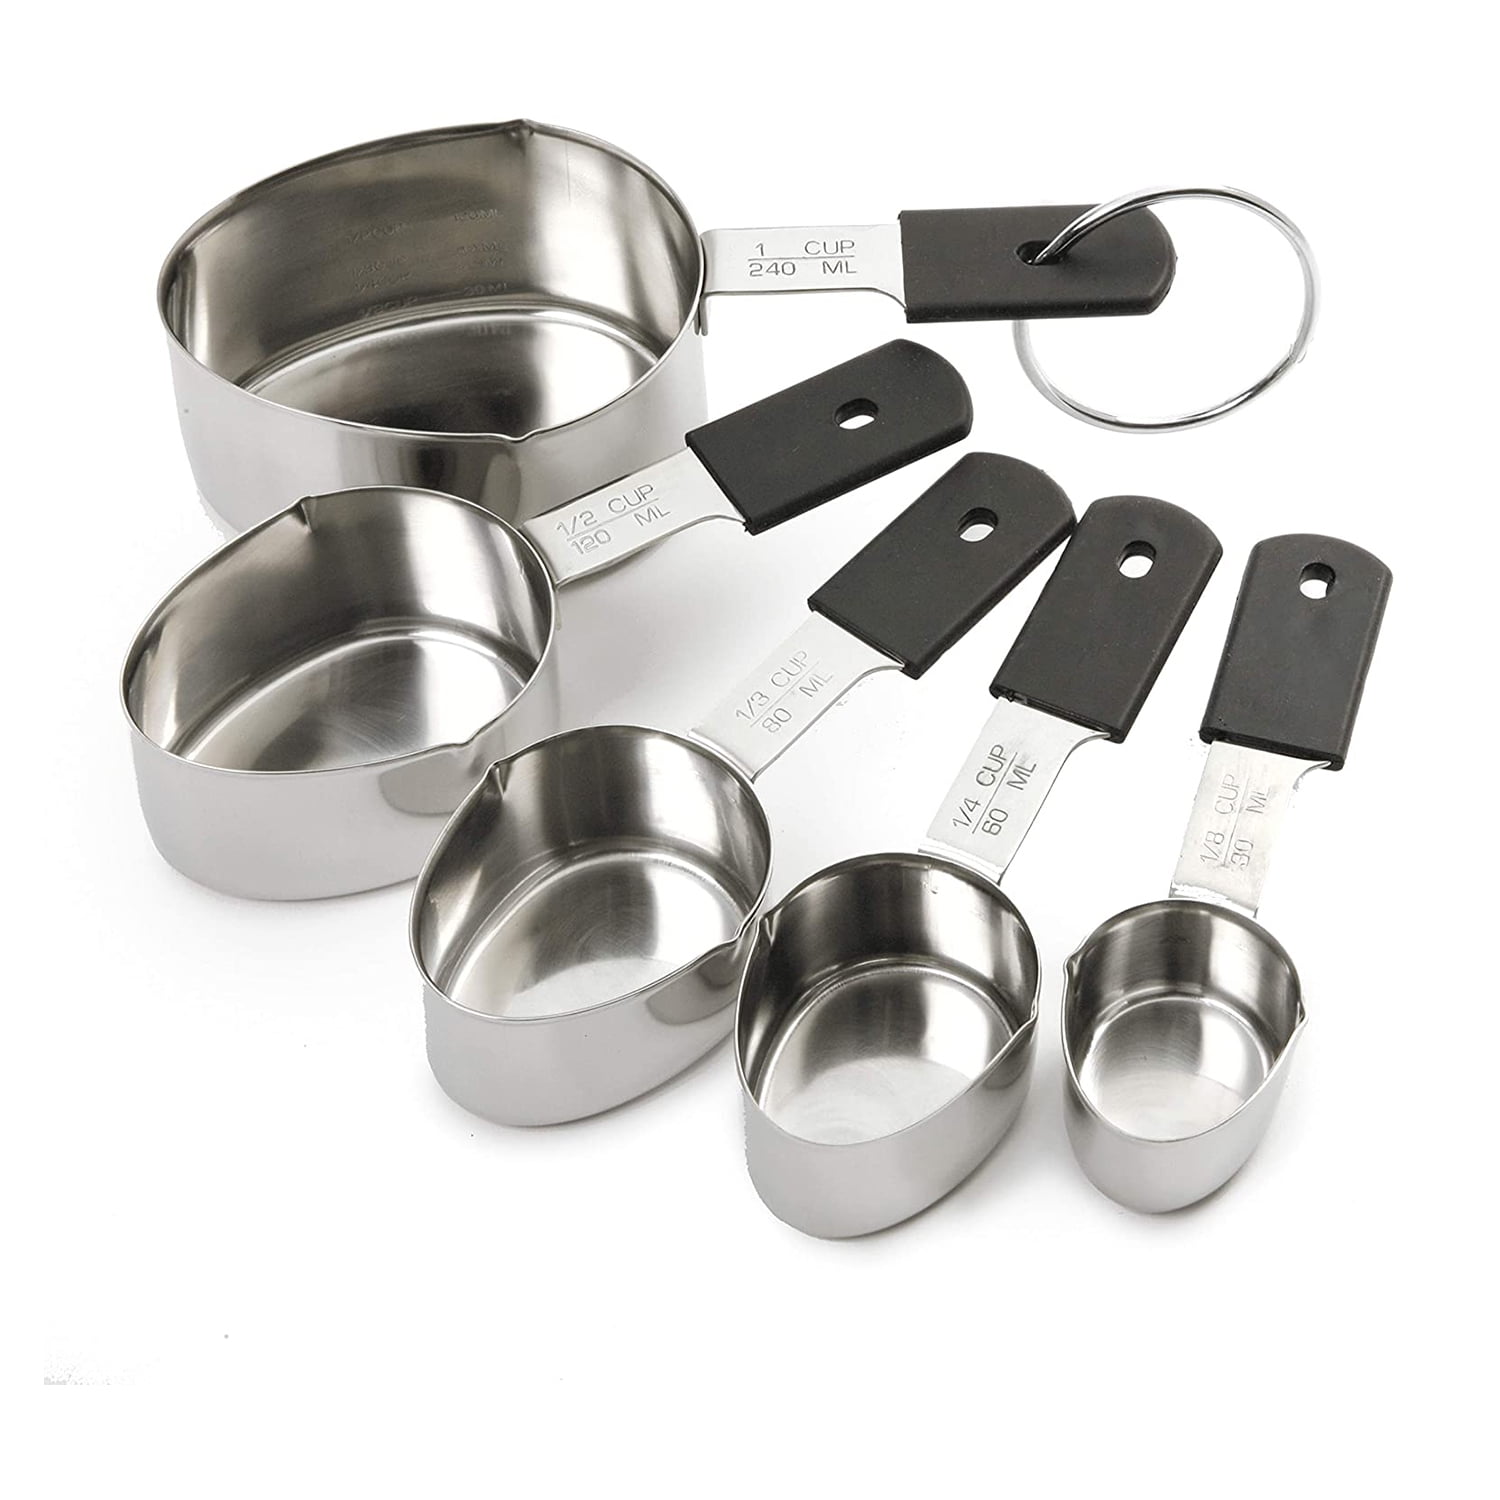 Nstezrne Measuring Cups Set of 5, Stainless Steel Measuring Cups